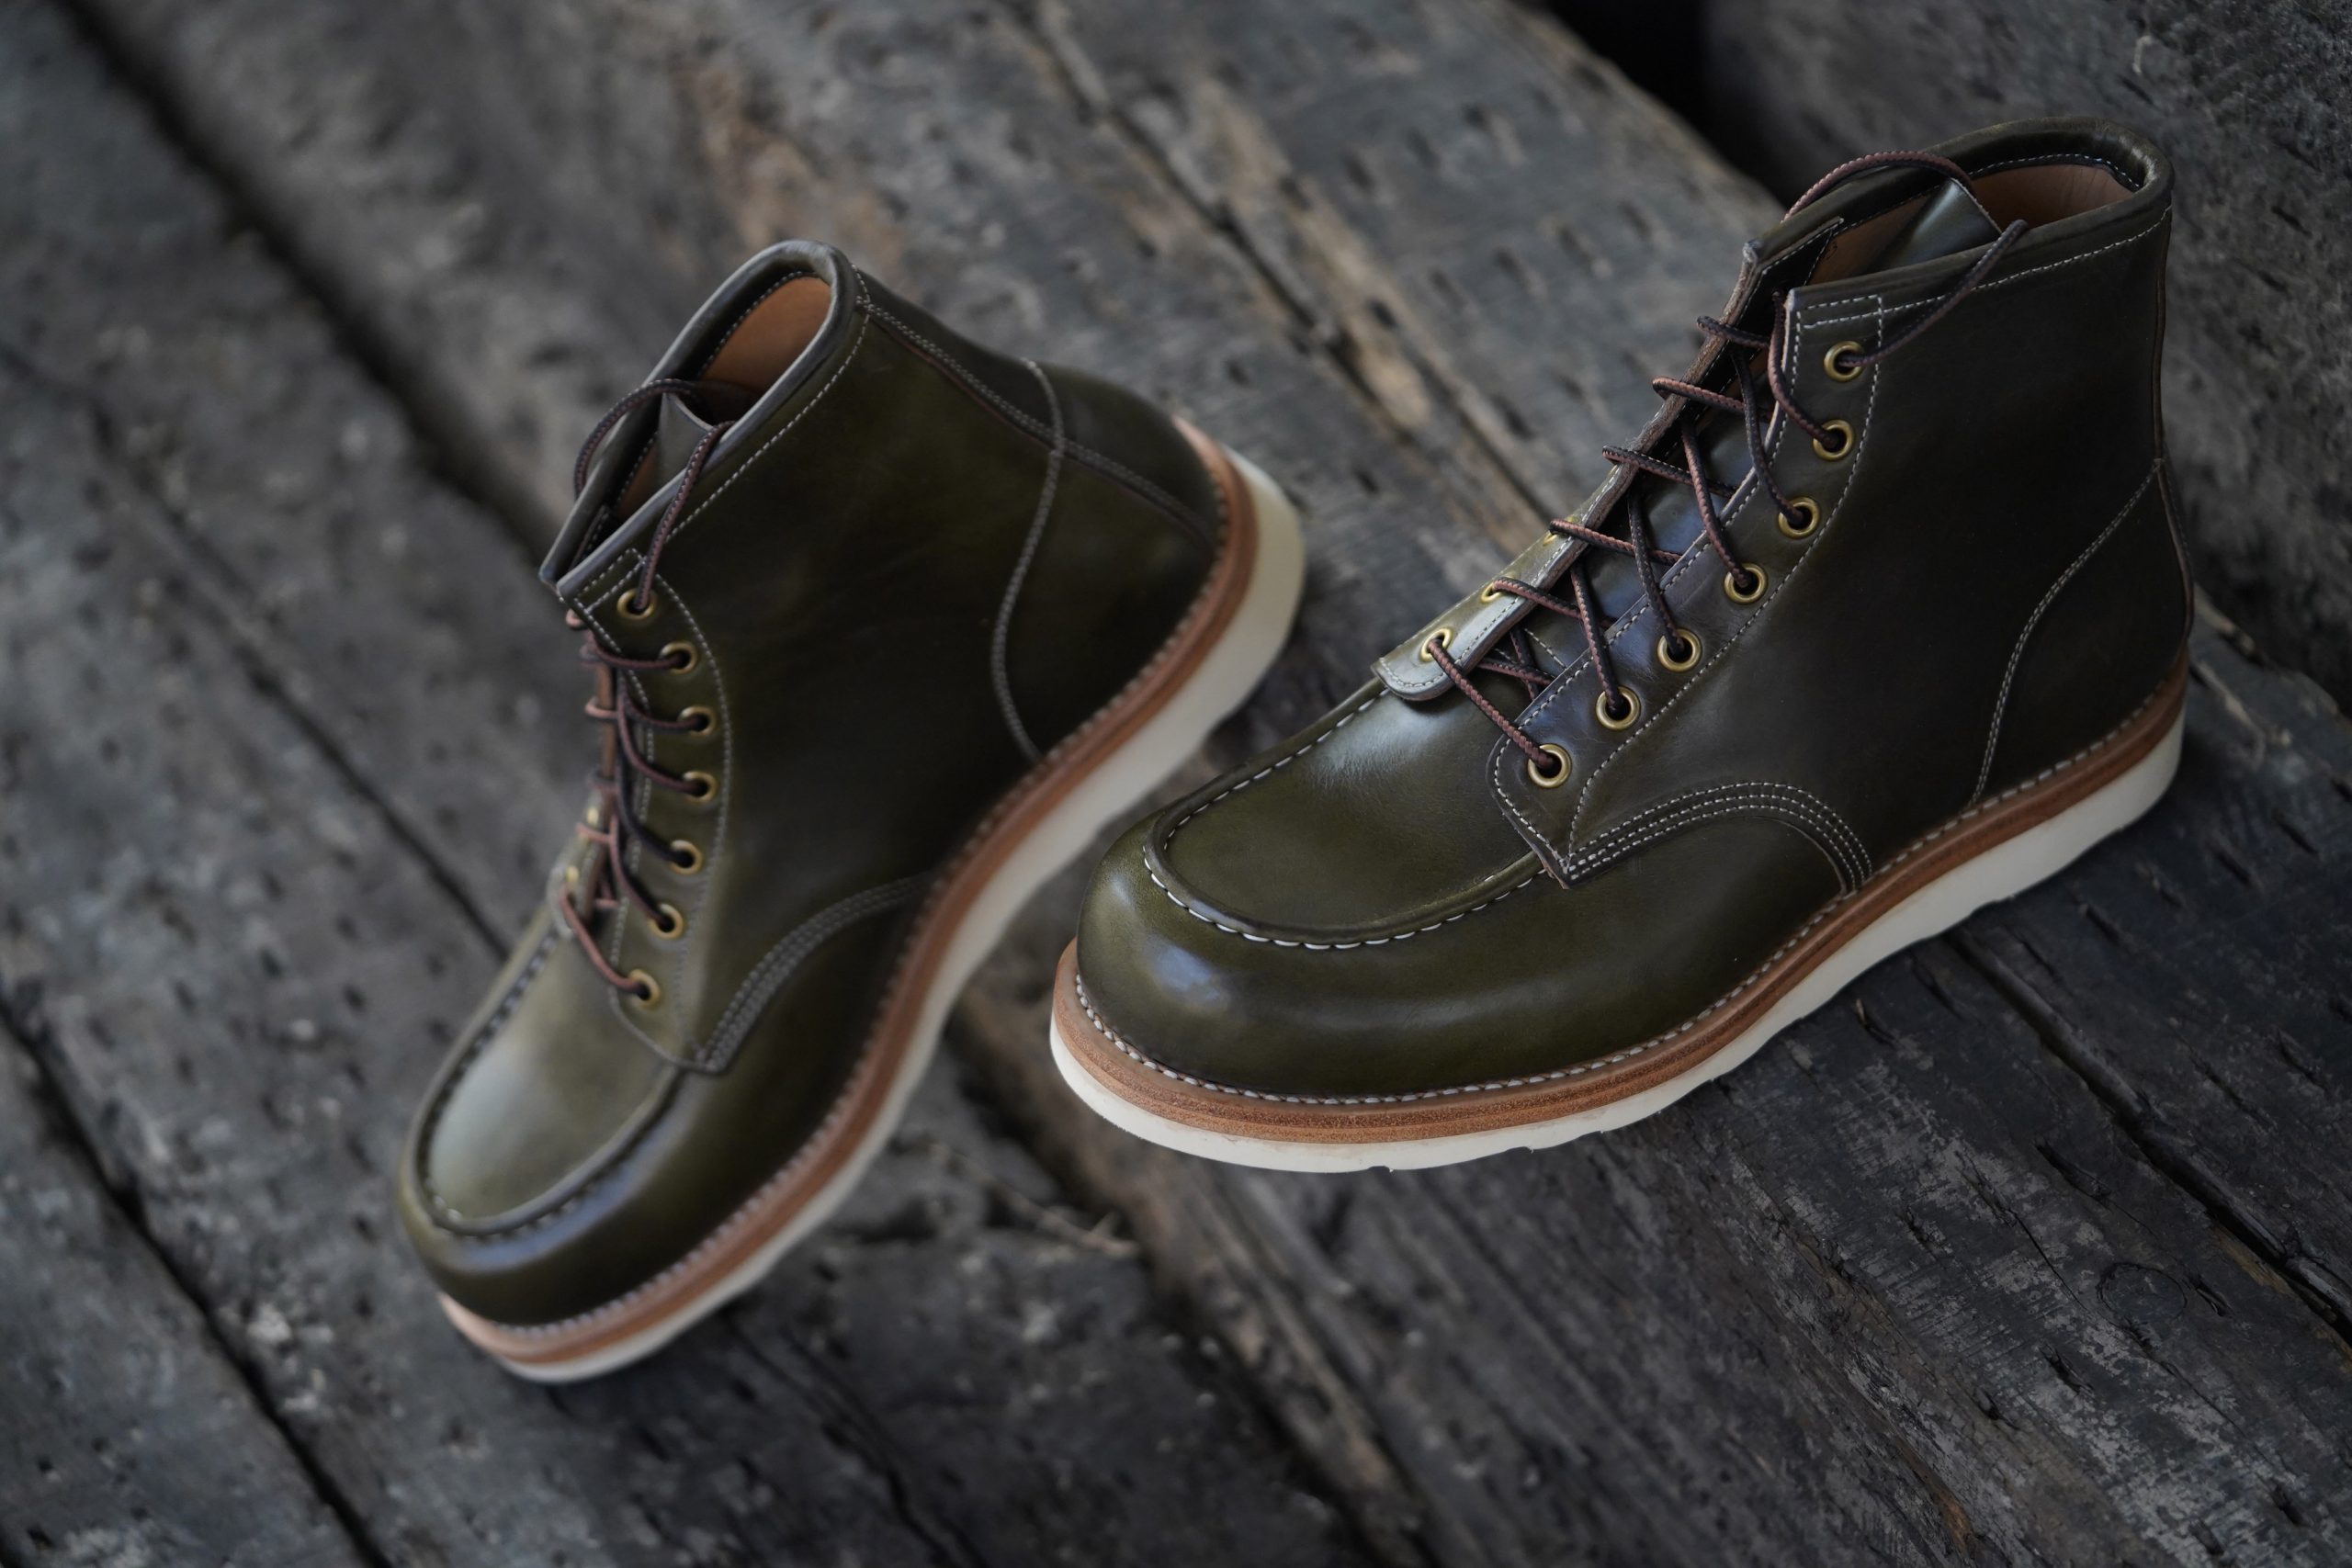 Horween Horsehide Teacore Leather Tender Moctoe Boots In Olive - Kind ...